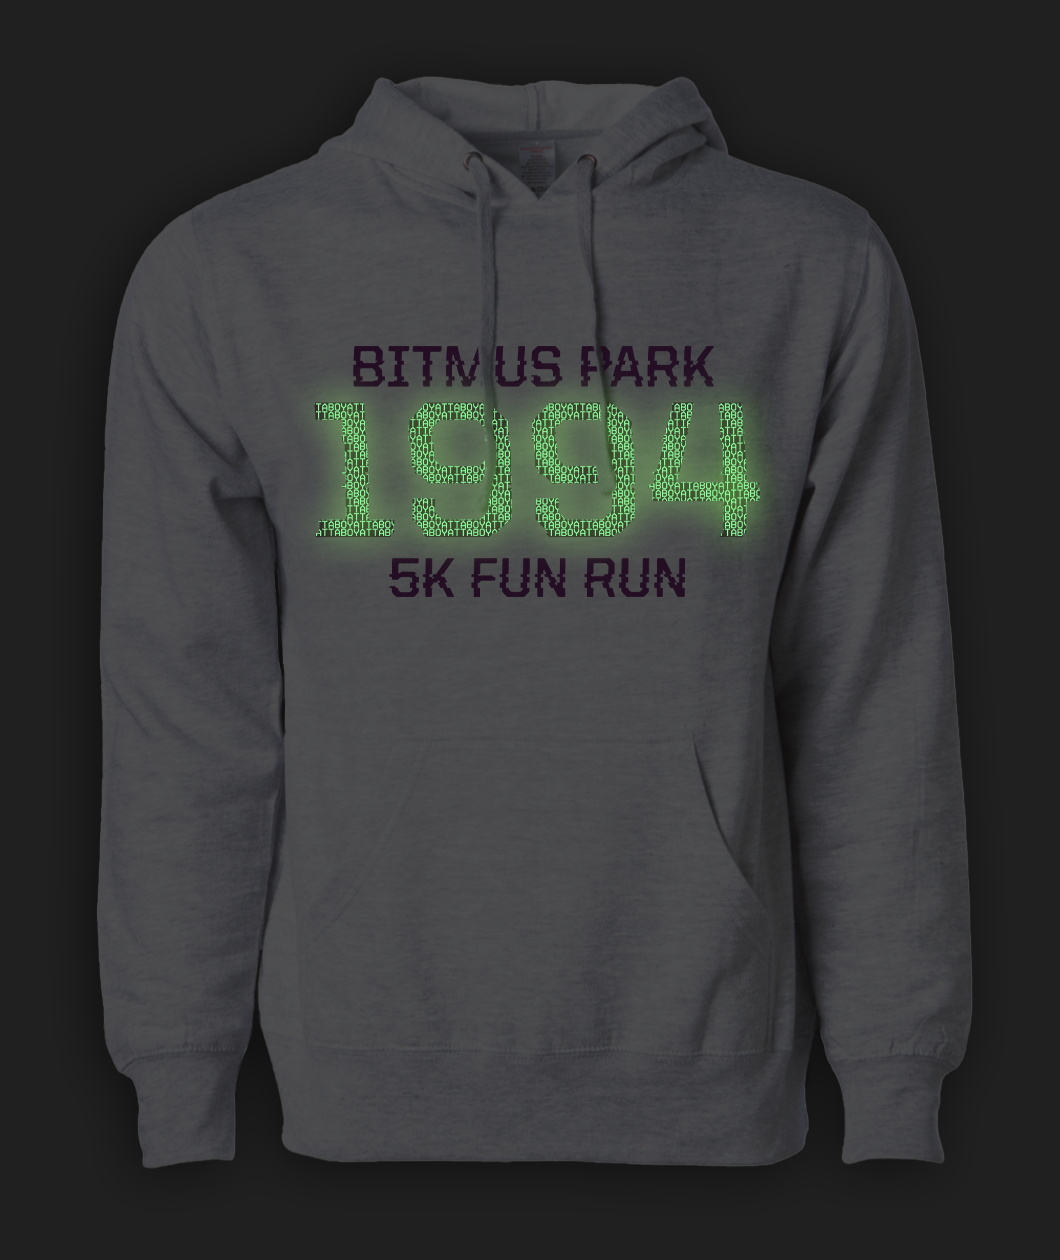 Heather white hoodie with large glowing 1994 in the front center and "Bitmus Park 5K Fun Run" sandwiched around it in smaller font. By Brian David Gilbert.